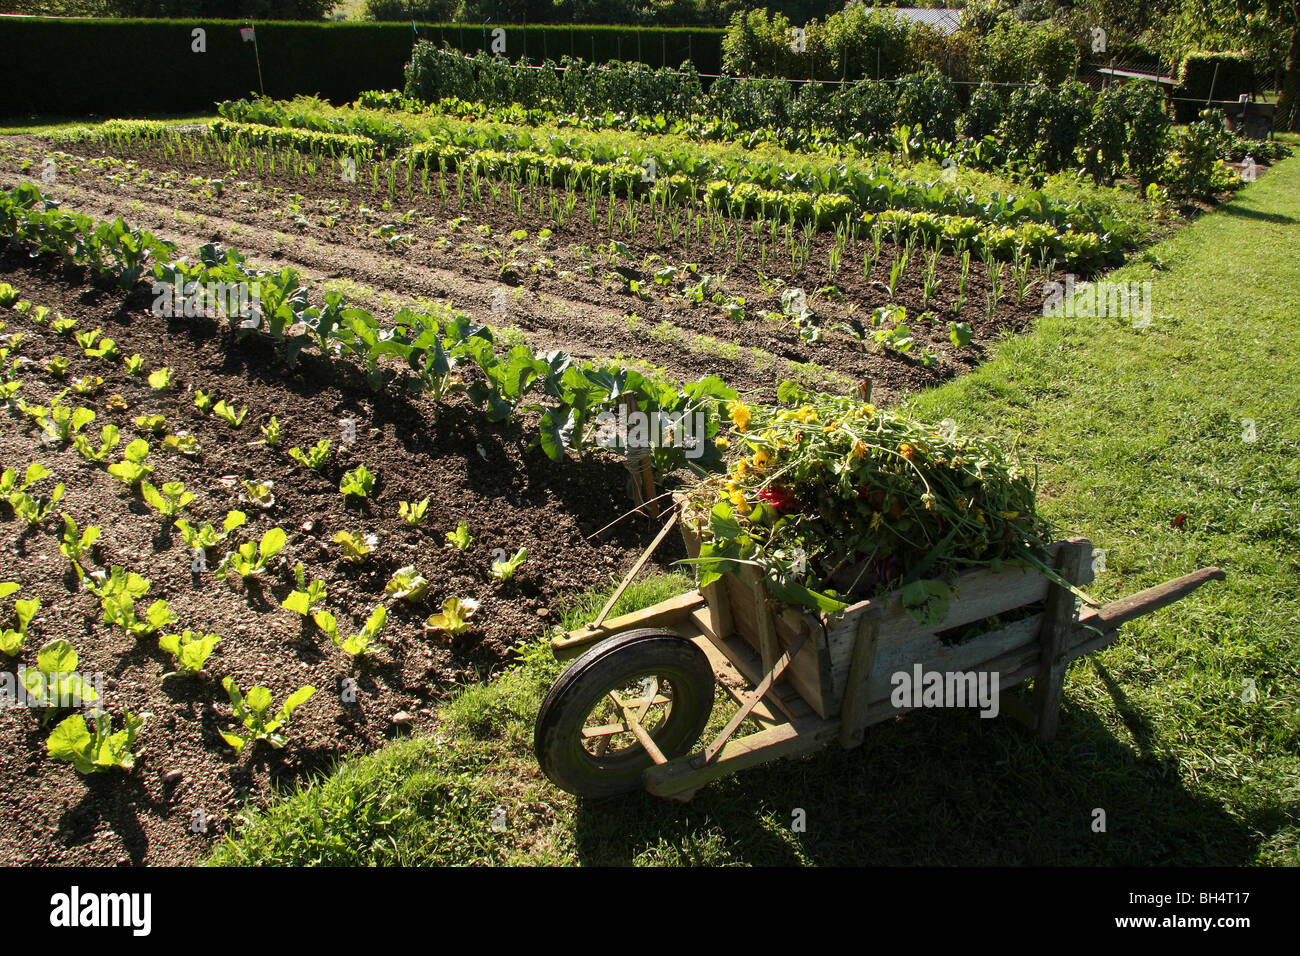 Rows of vegetables in a well tended garden with old wooden wheelbarrow in the foreground. Stock Photo